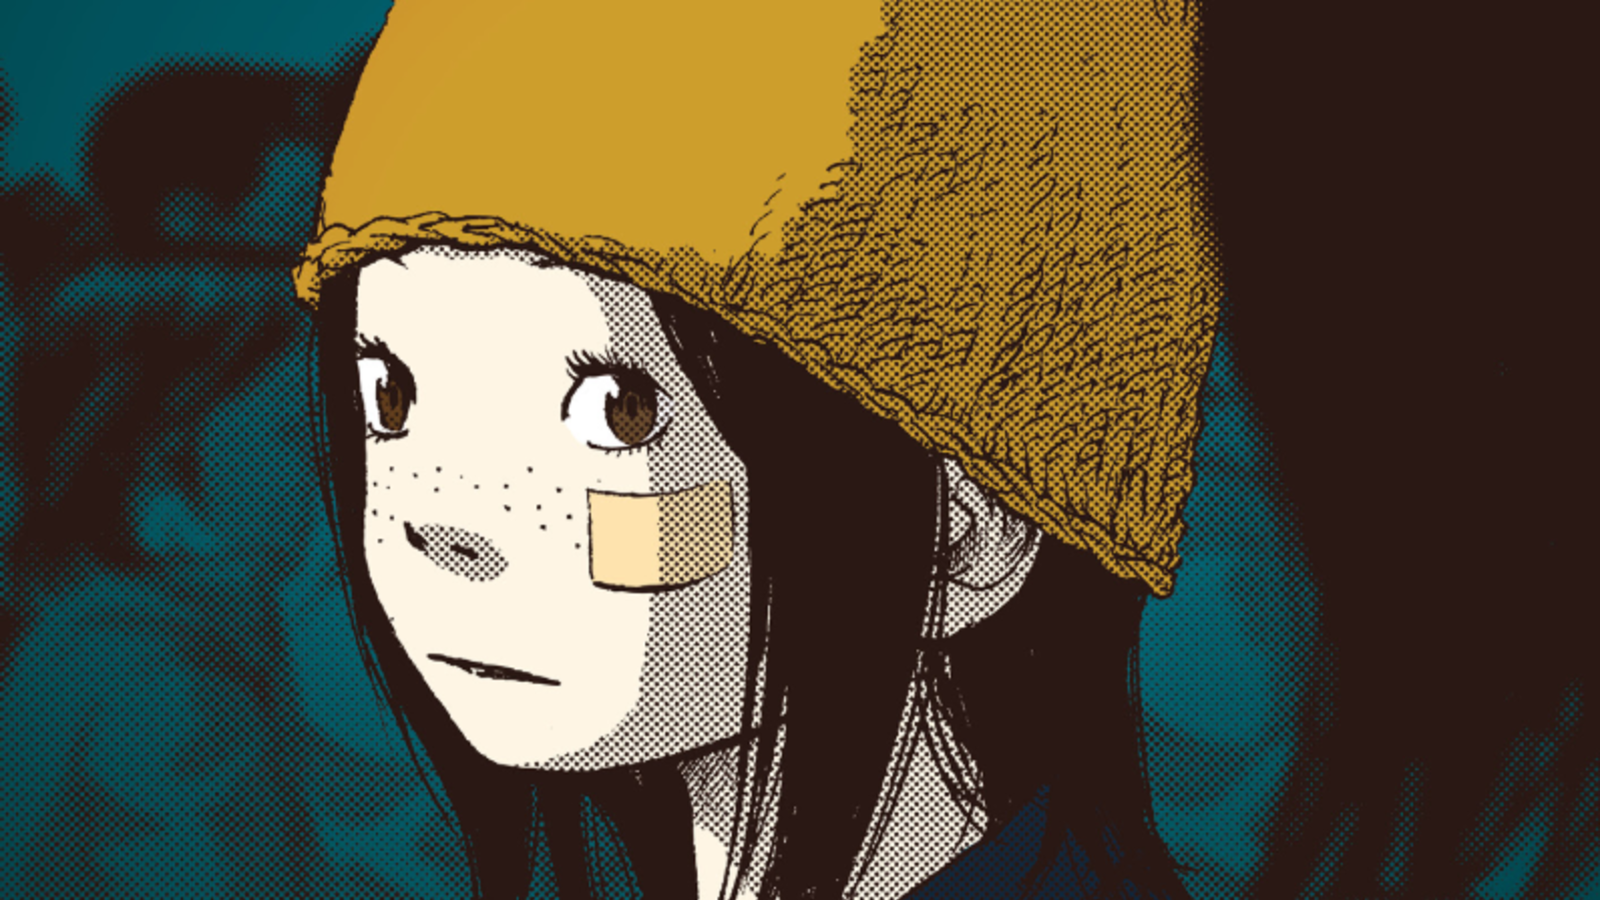 Inio Asano Is A Dark Manga Artist For Adults Who Want Something Real